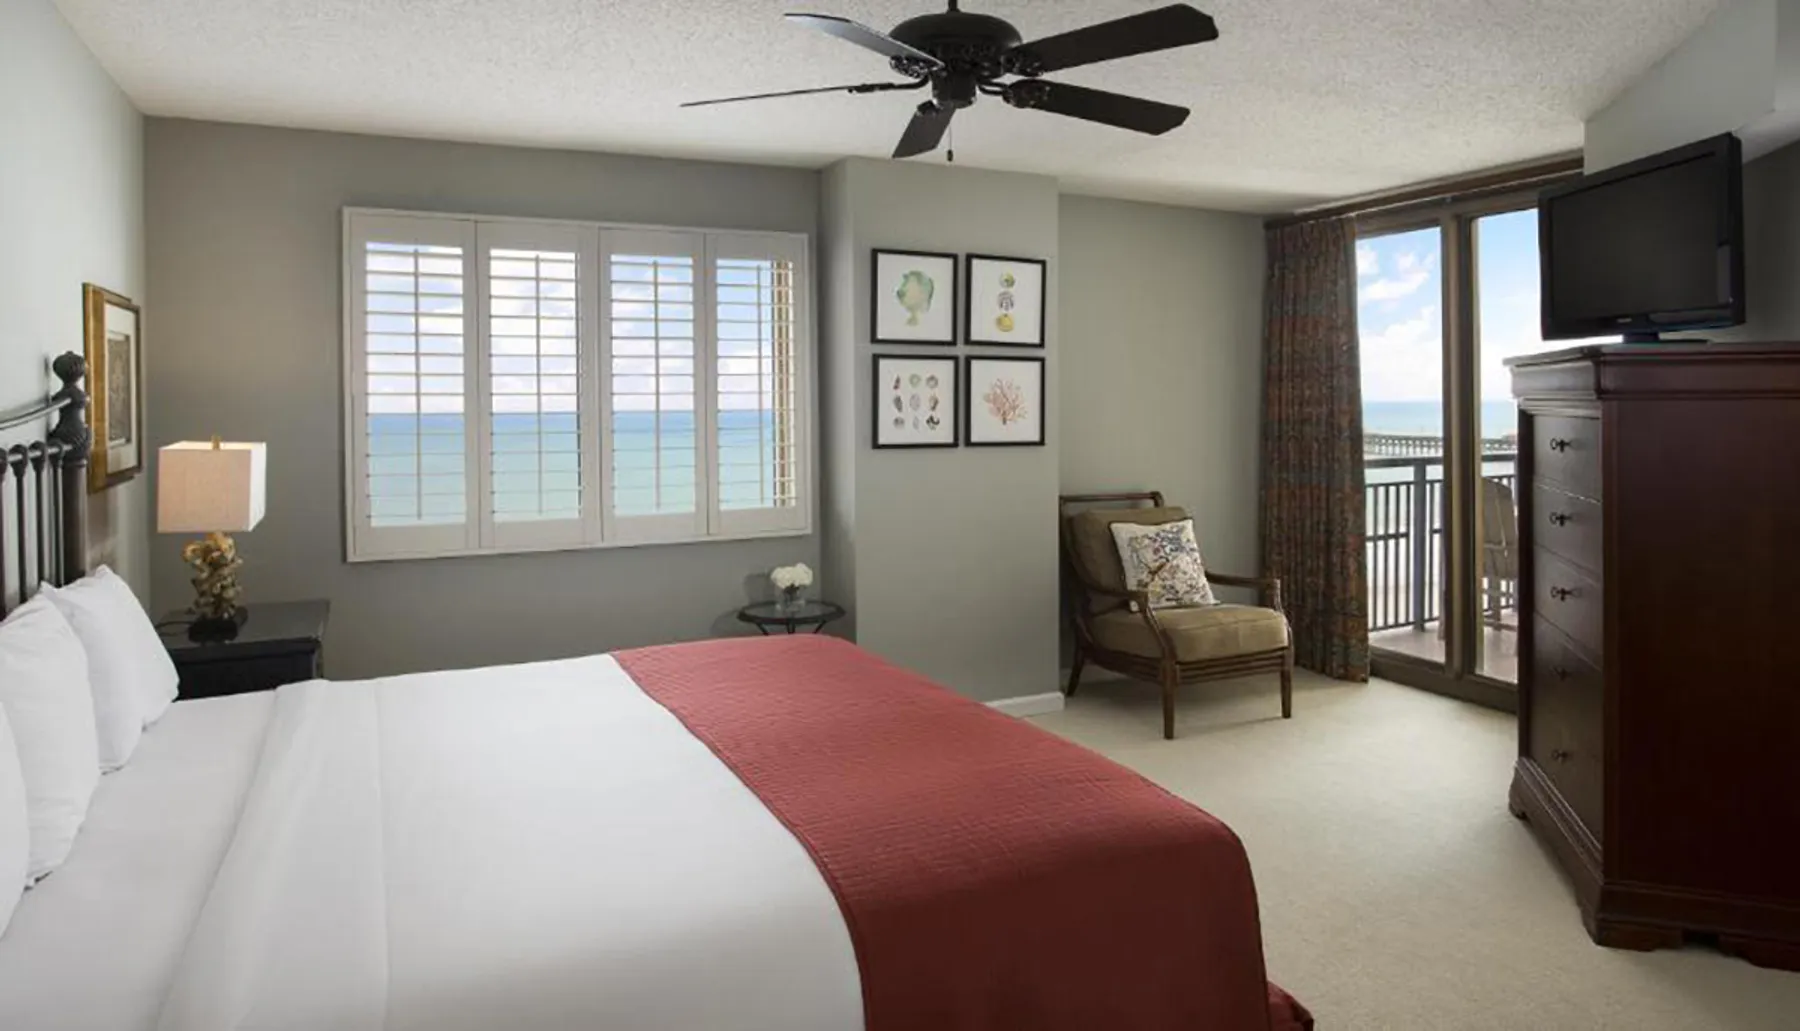 The image shows a neatly arranged bedroom with a large bed, furniture, artwork on the walls, and a balcony overlooking the ocean.